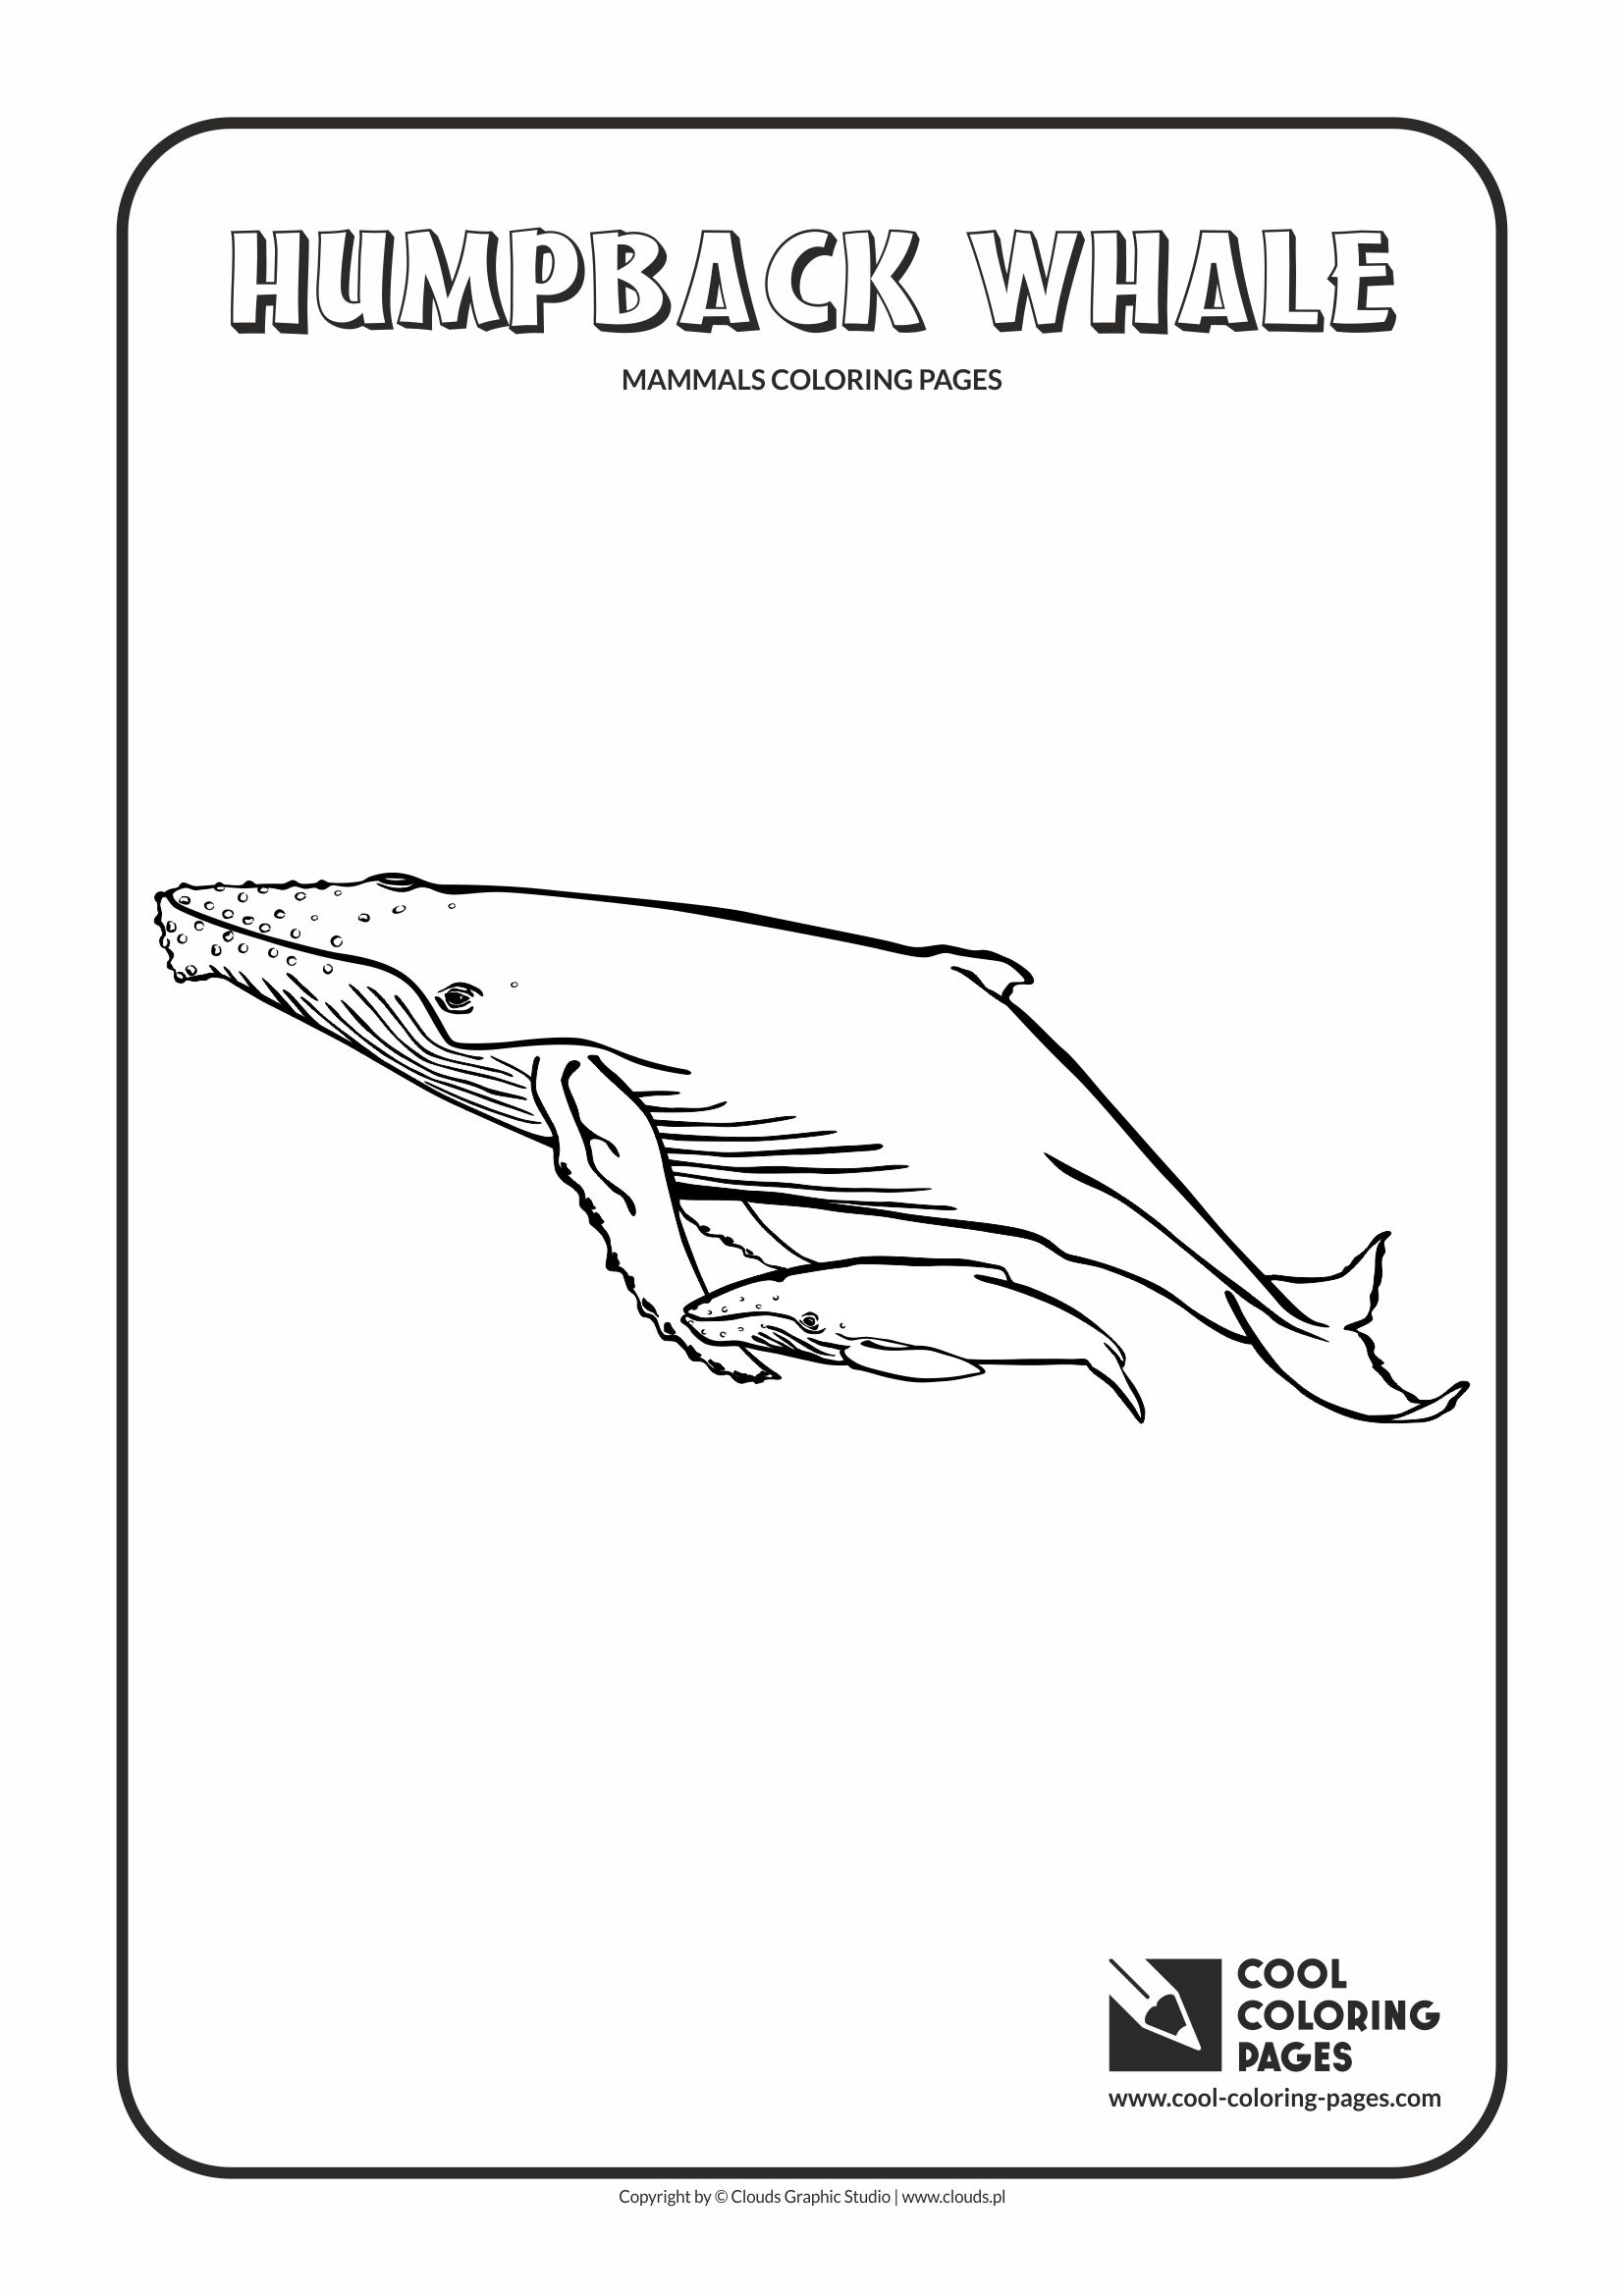 Cool Coloring Pages - Animals / Humpback whale / Coloring page with humpback whale